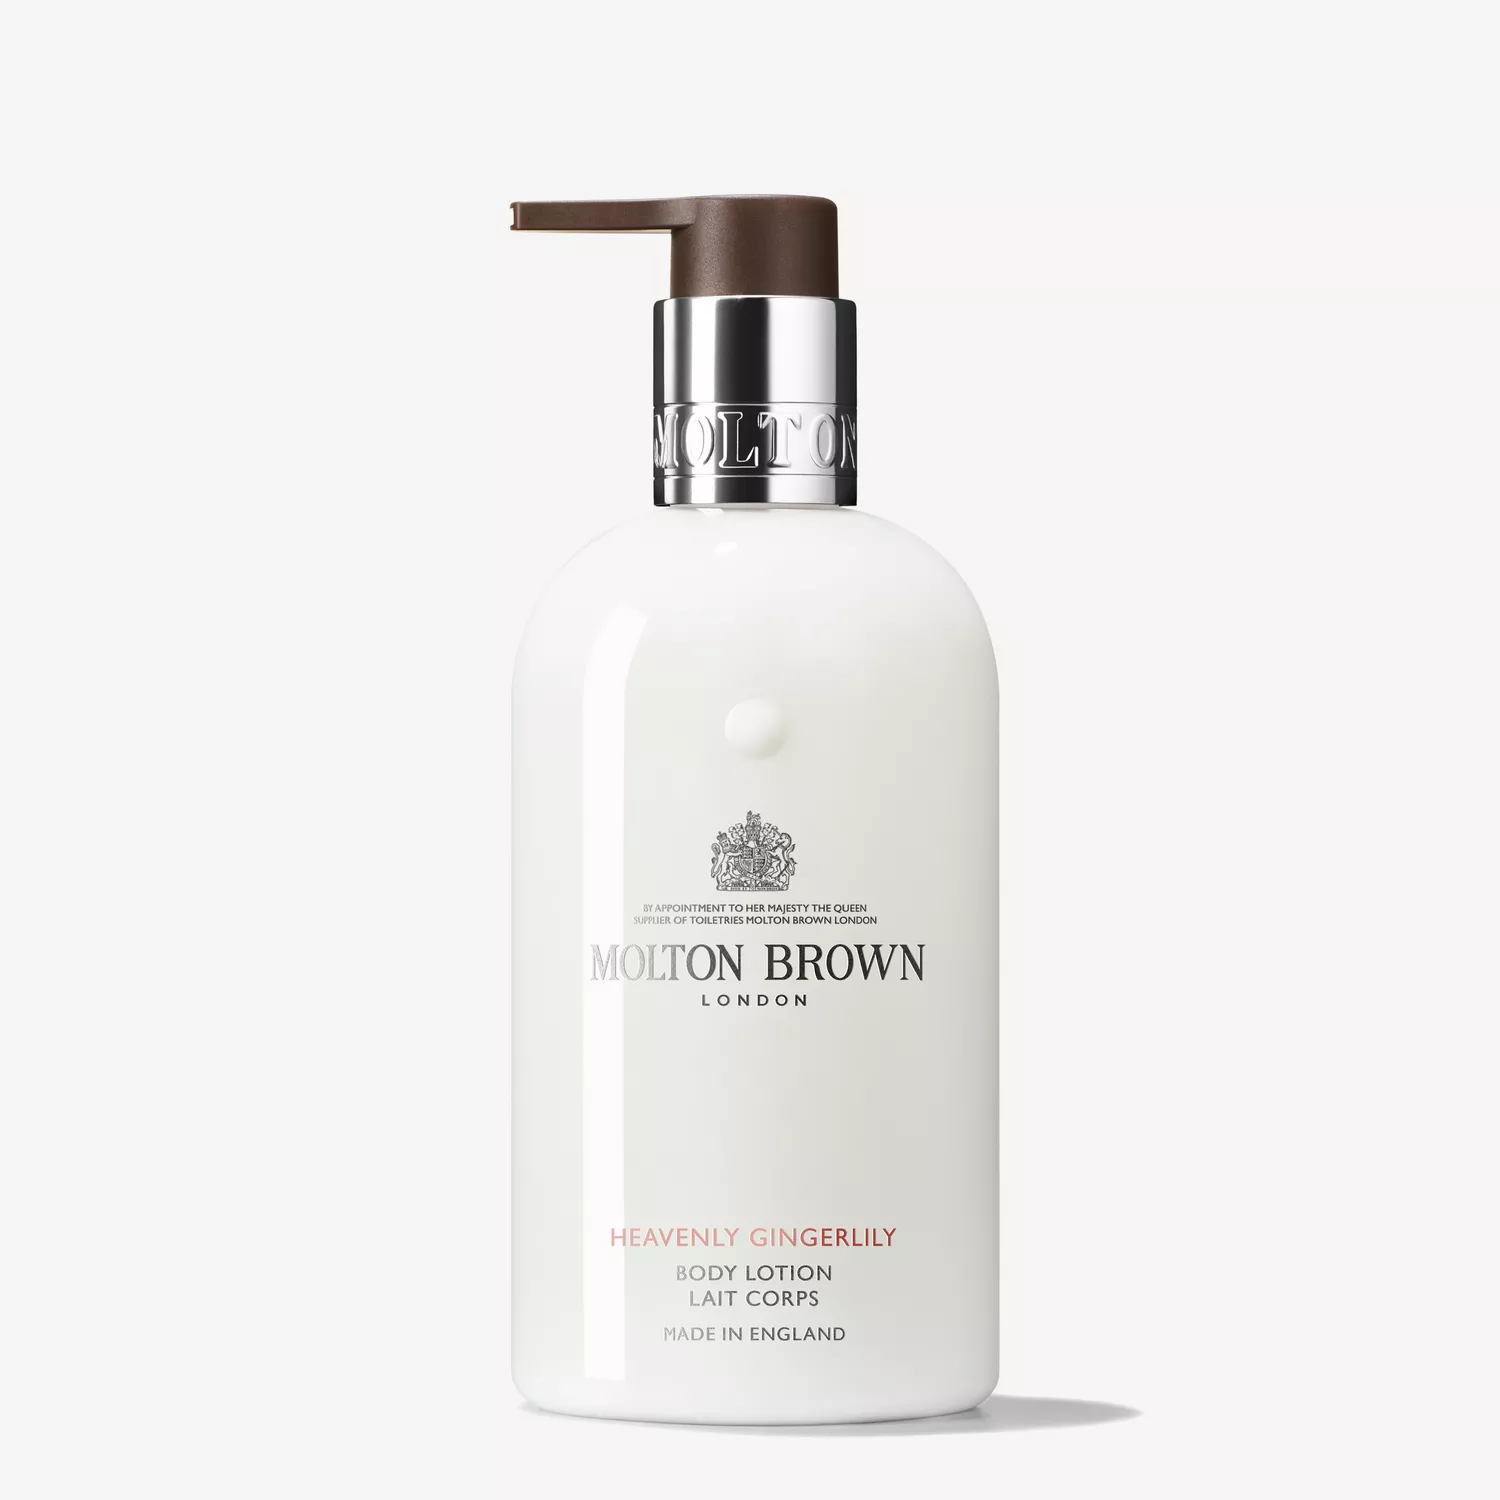 HEAVENLY GINGERLILY BODY LOTION 